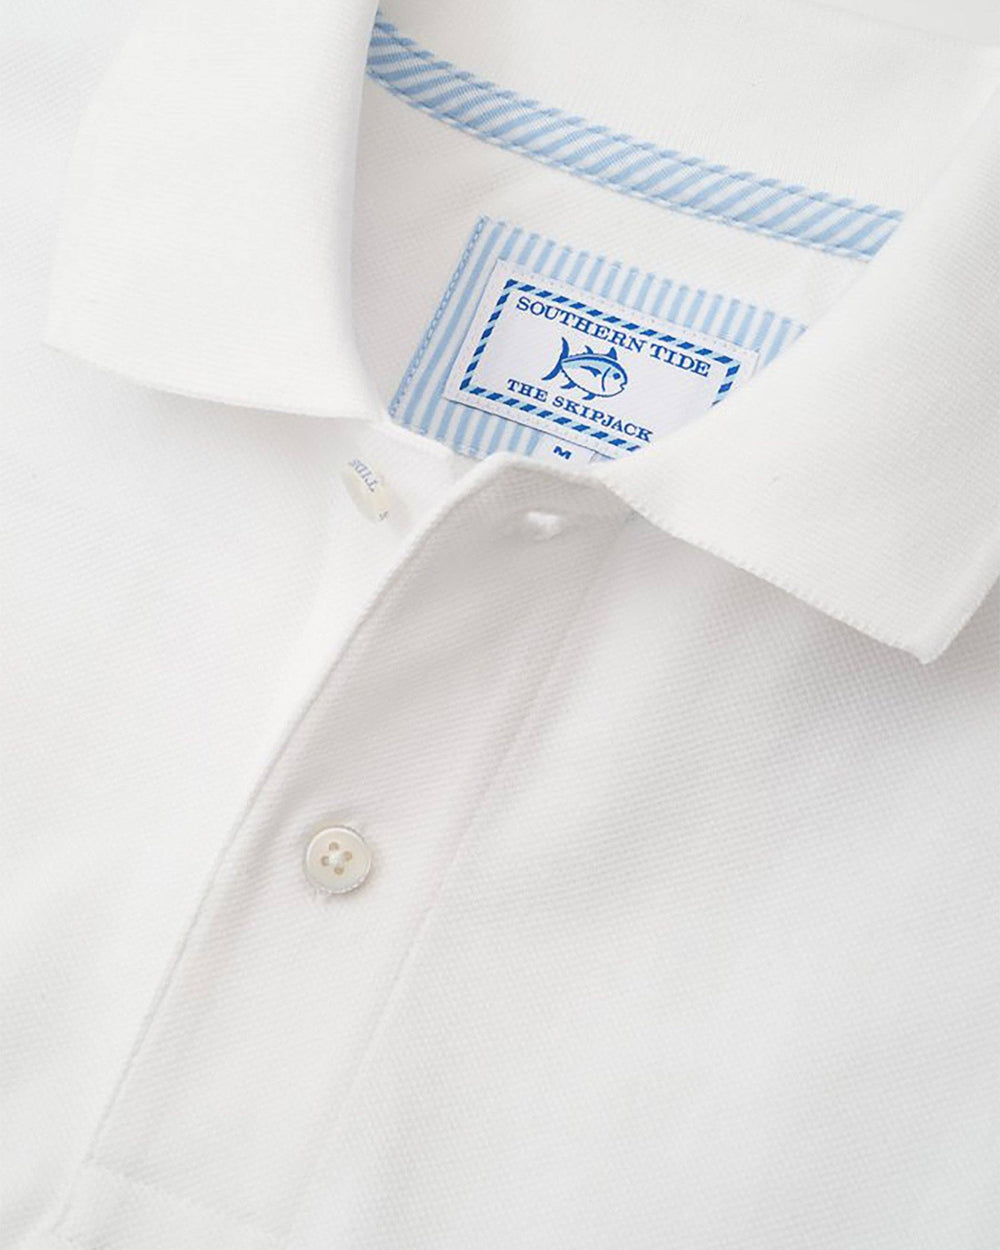 The detail of the Men's White Furman Pique Polo Shirt by Southern Tide - Classic White